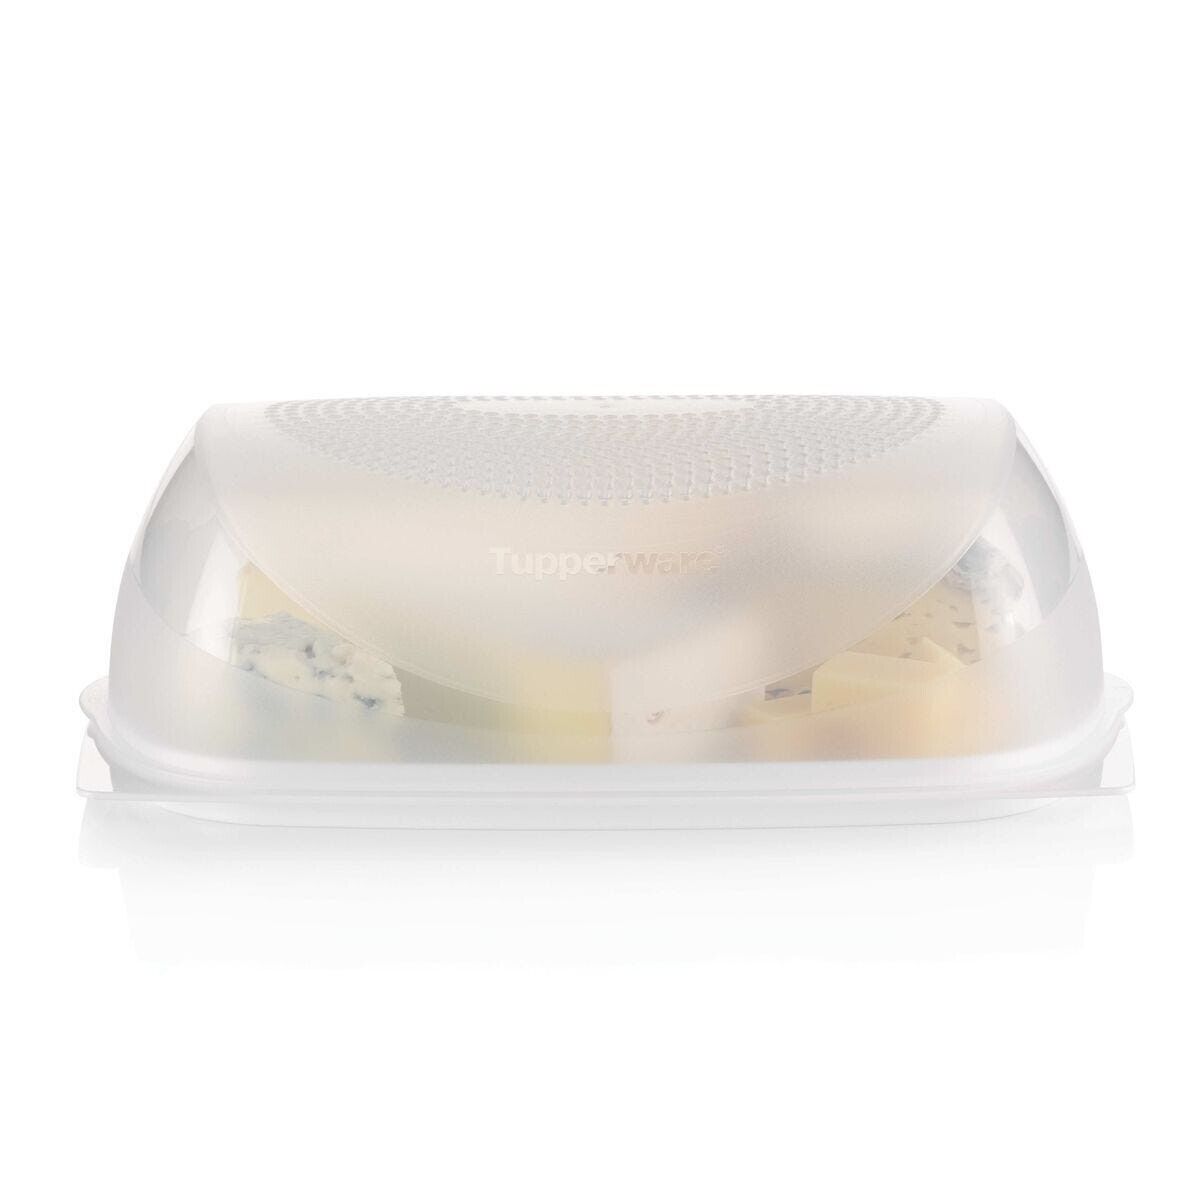 NEW Tupperware cheese smart large rectangle container cheesMart 